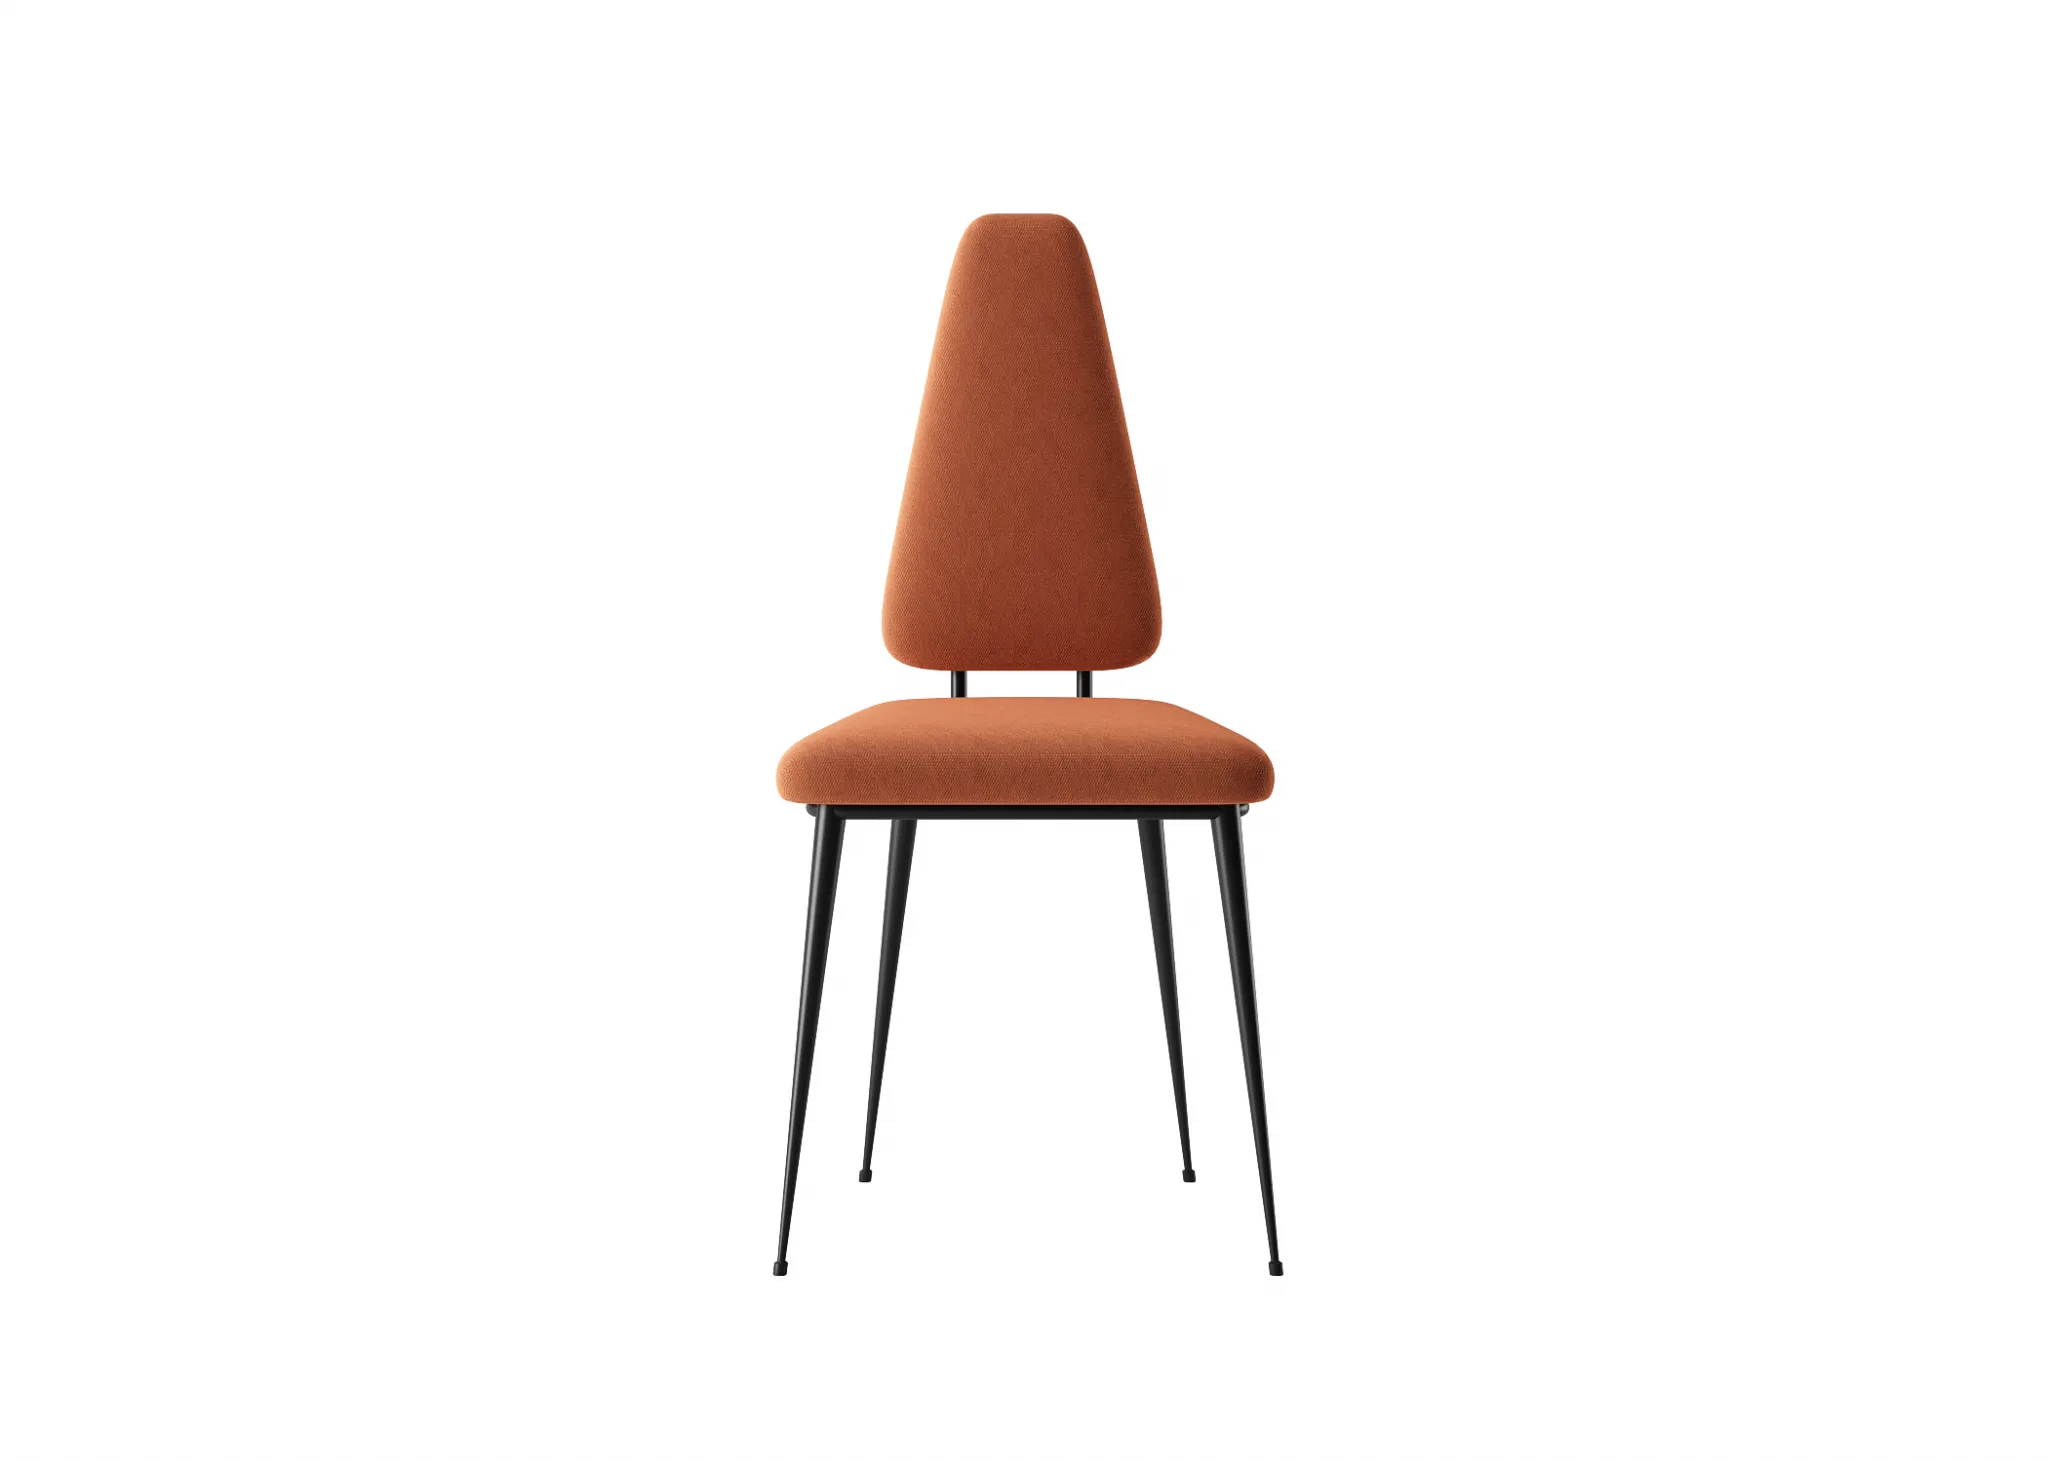 FURNITURE 3D MODELS – CHAIRS – 0053